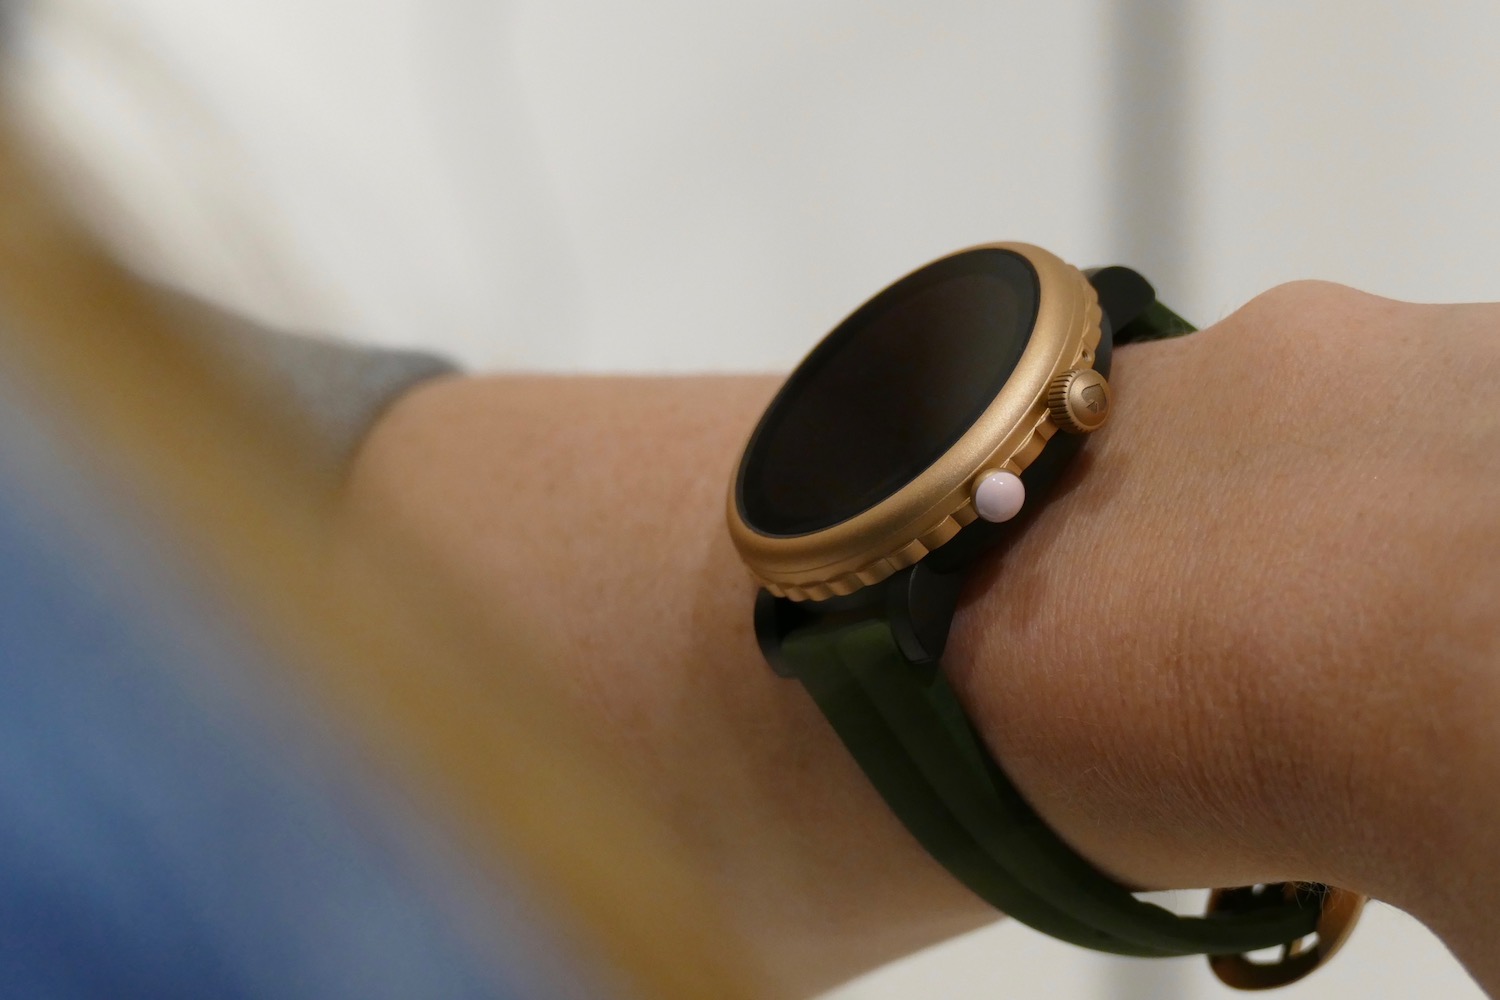 Kate Spade's New Smartwatch is Both Sporty and Glam | Digital Trends